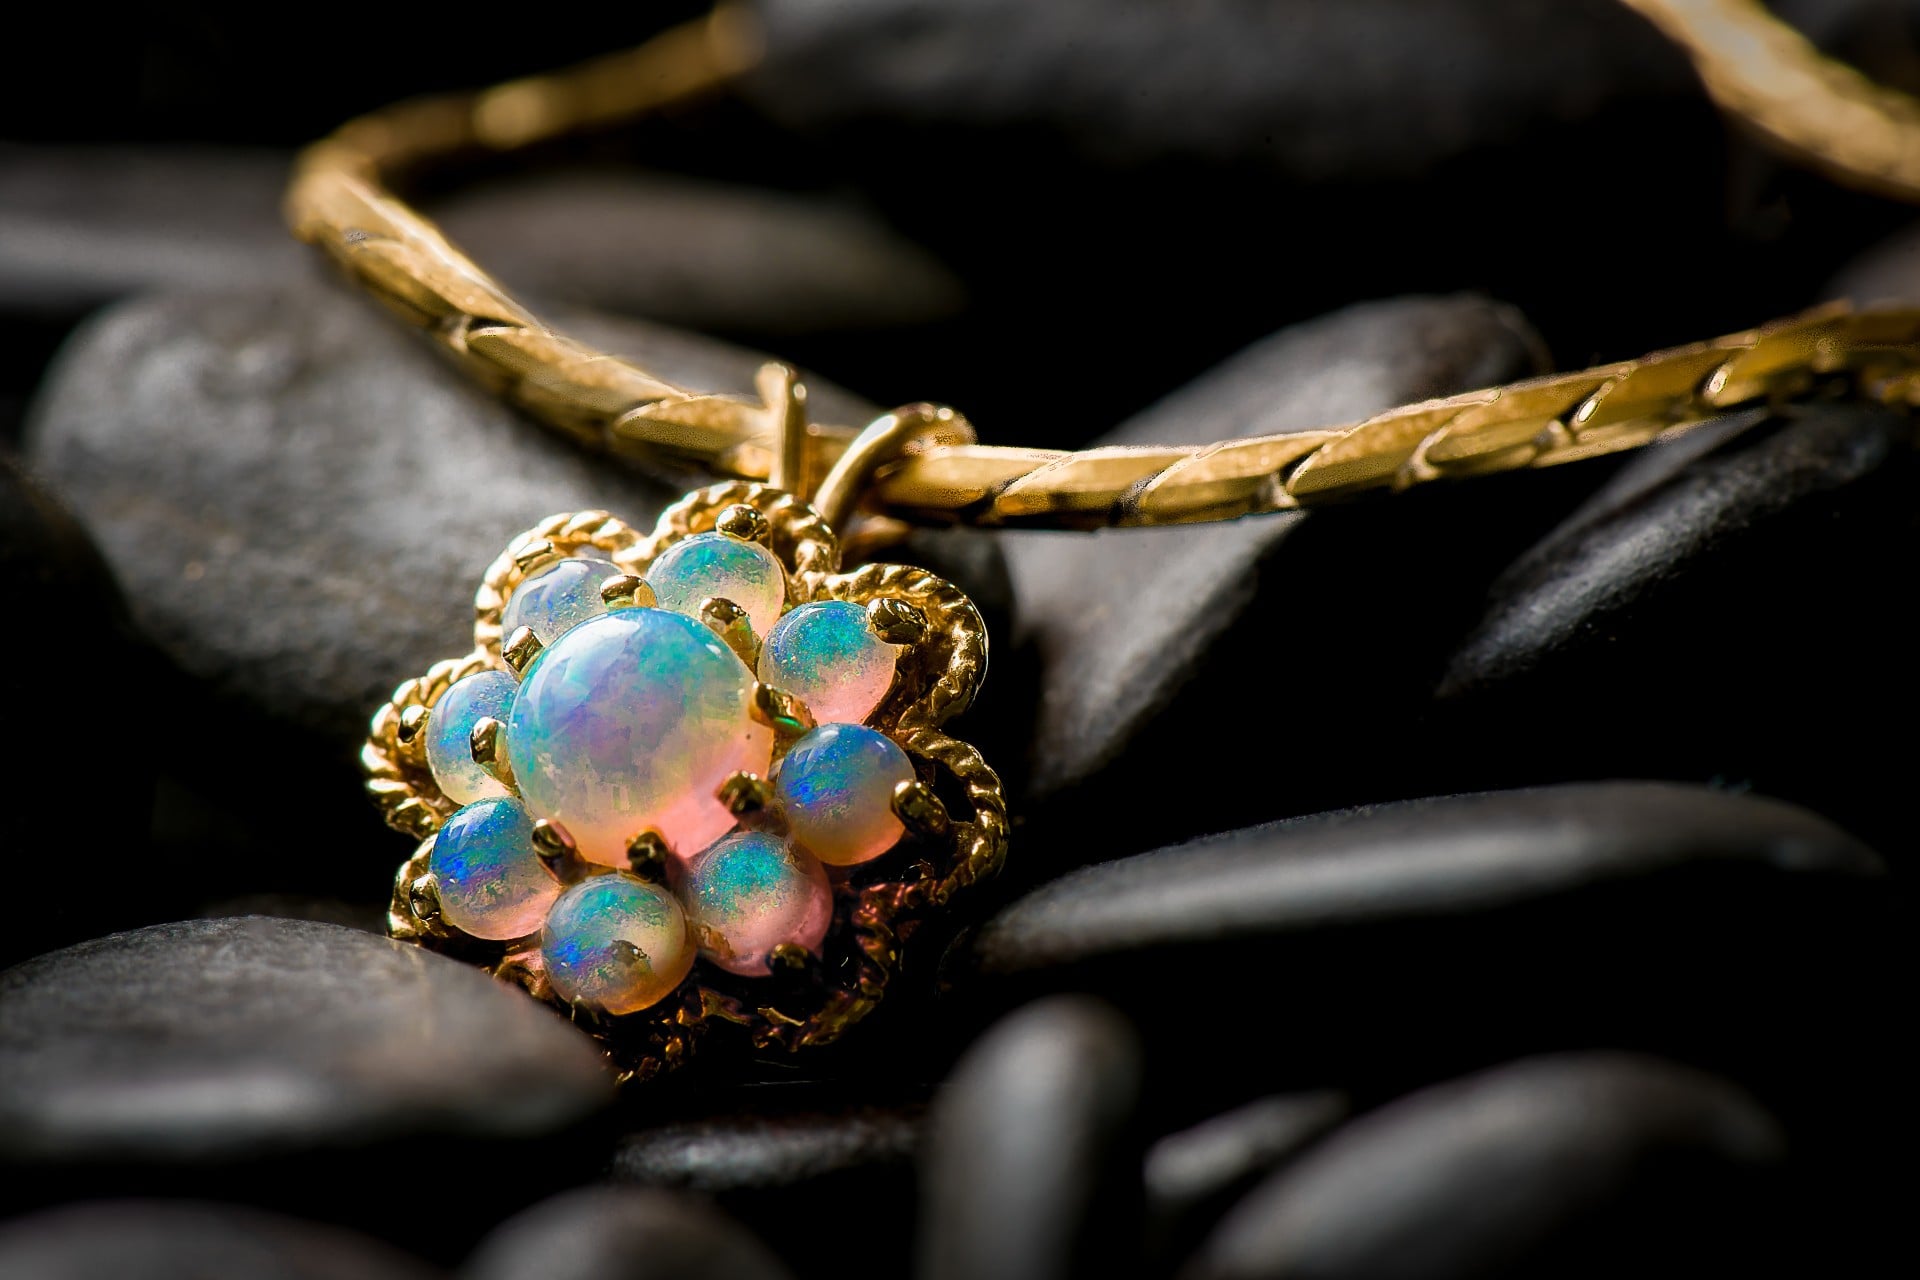 A yellow gold, floral-inspired opal pendant lays on black rocks.